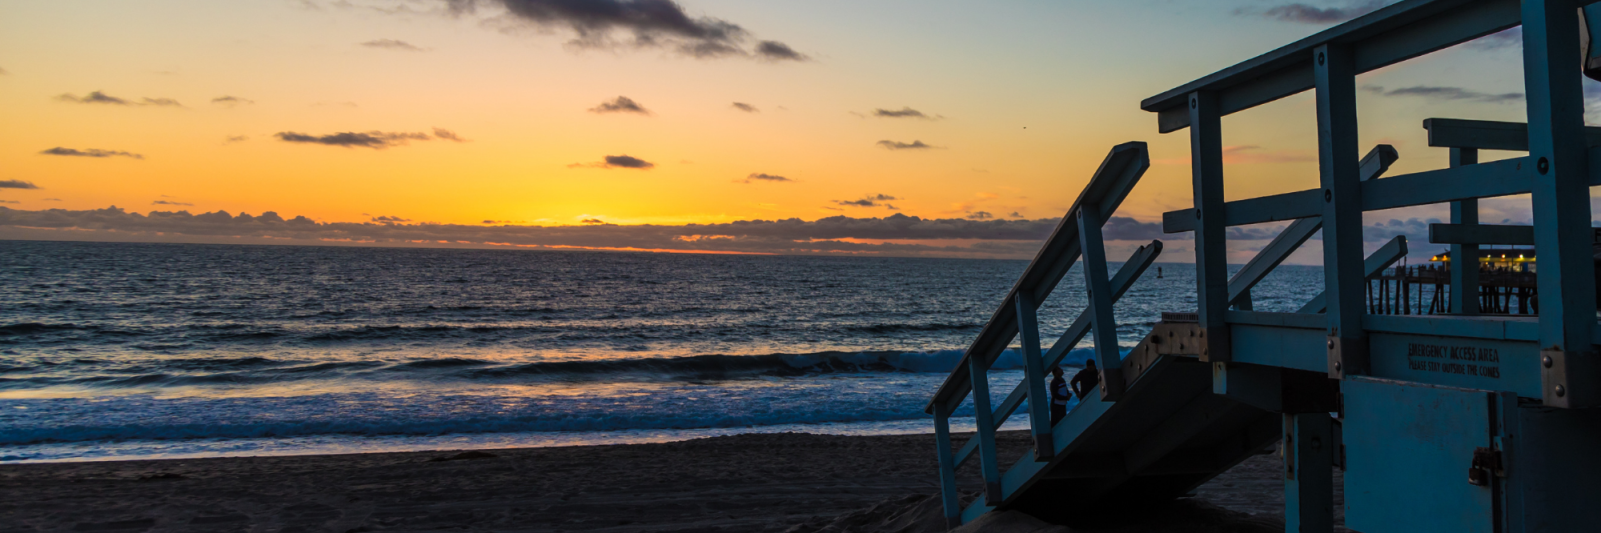 Lifeguard station on Pacific Ocean at sunset, credit: Andre Smit